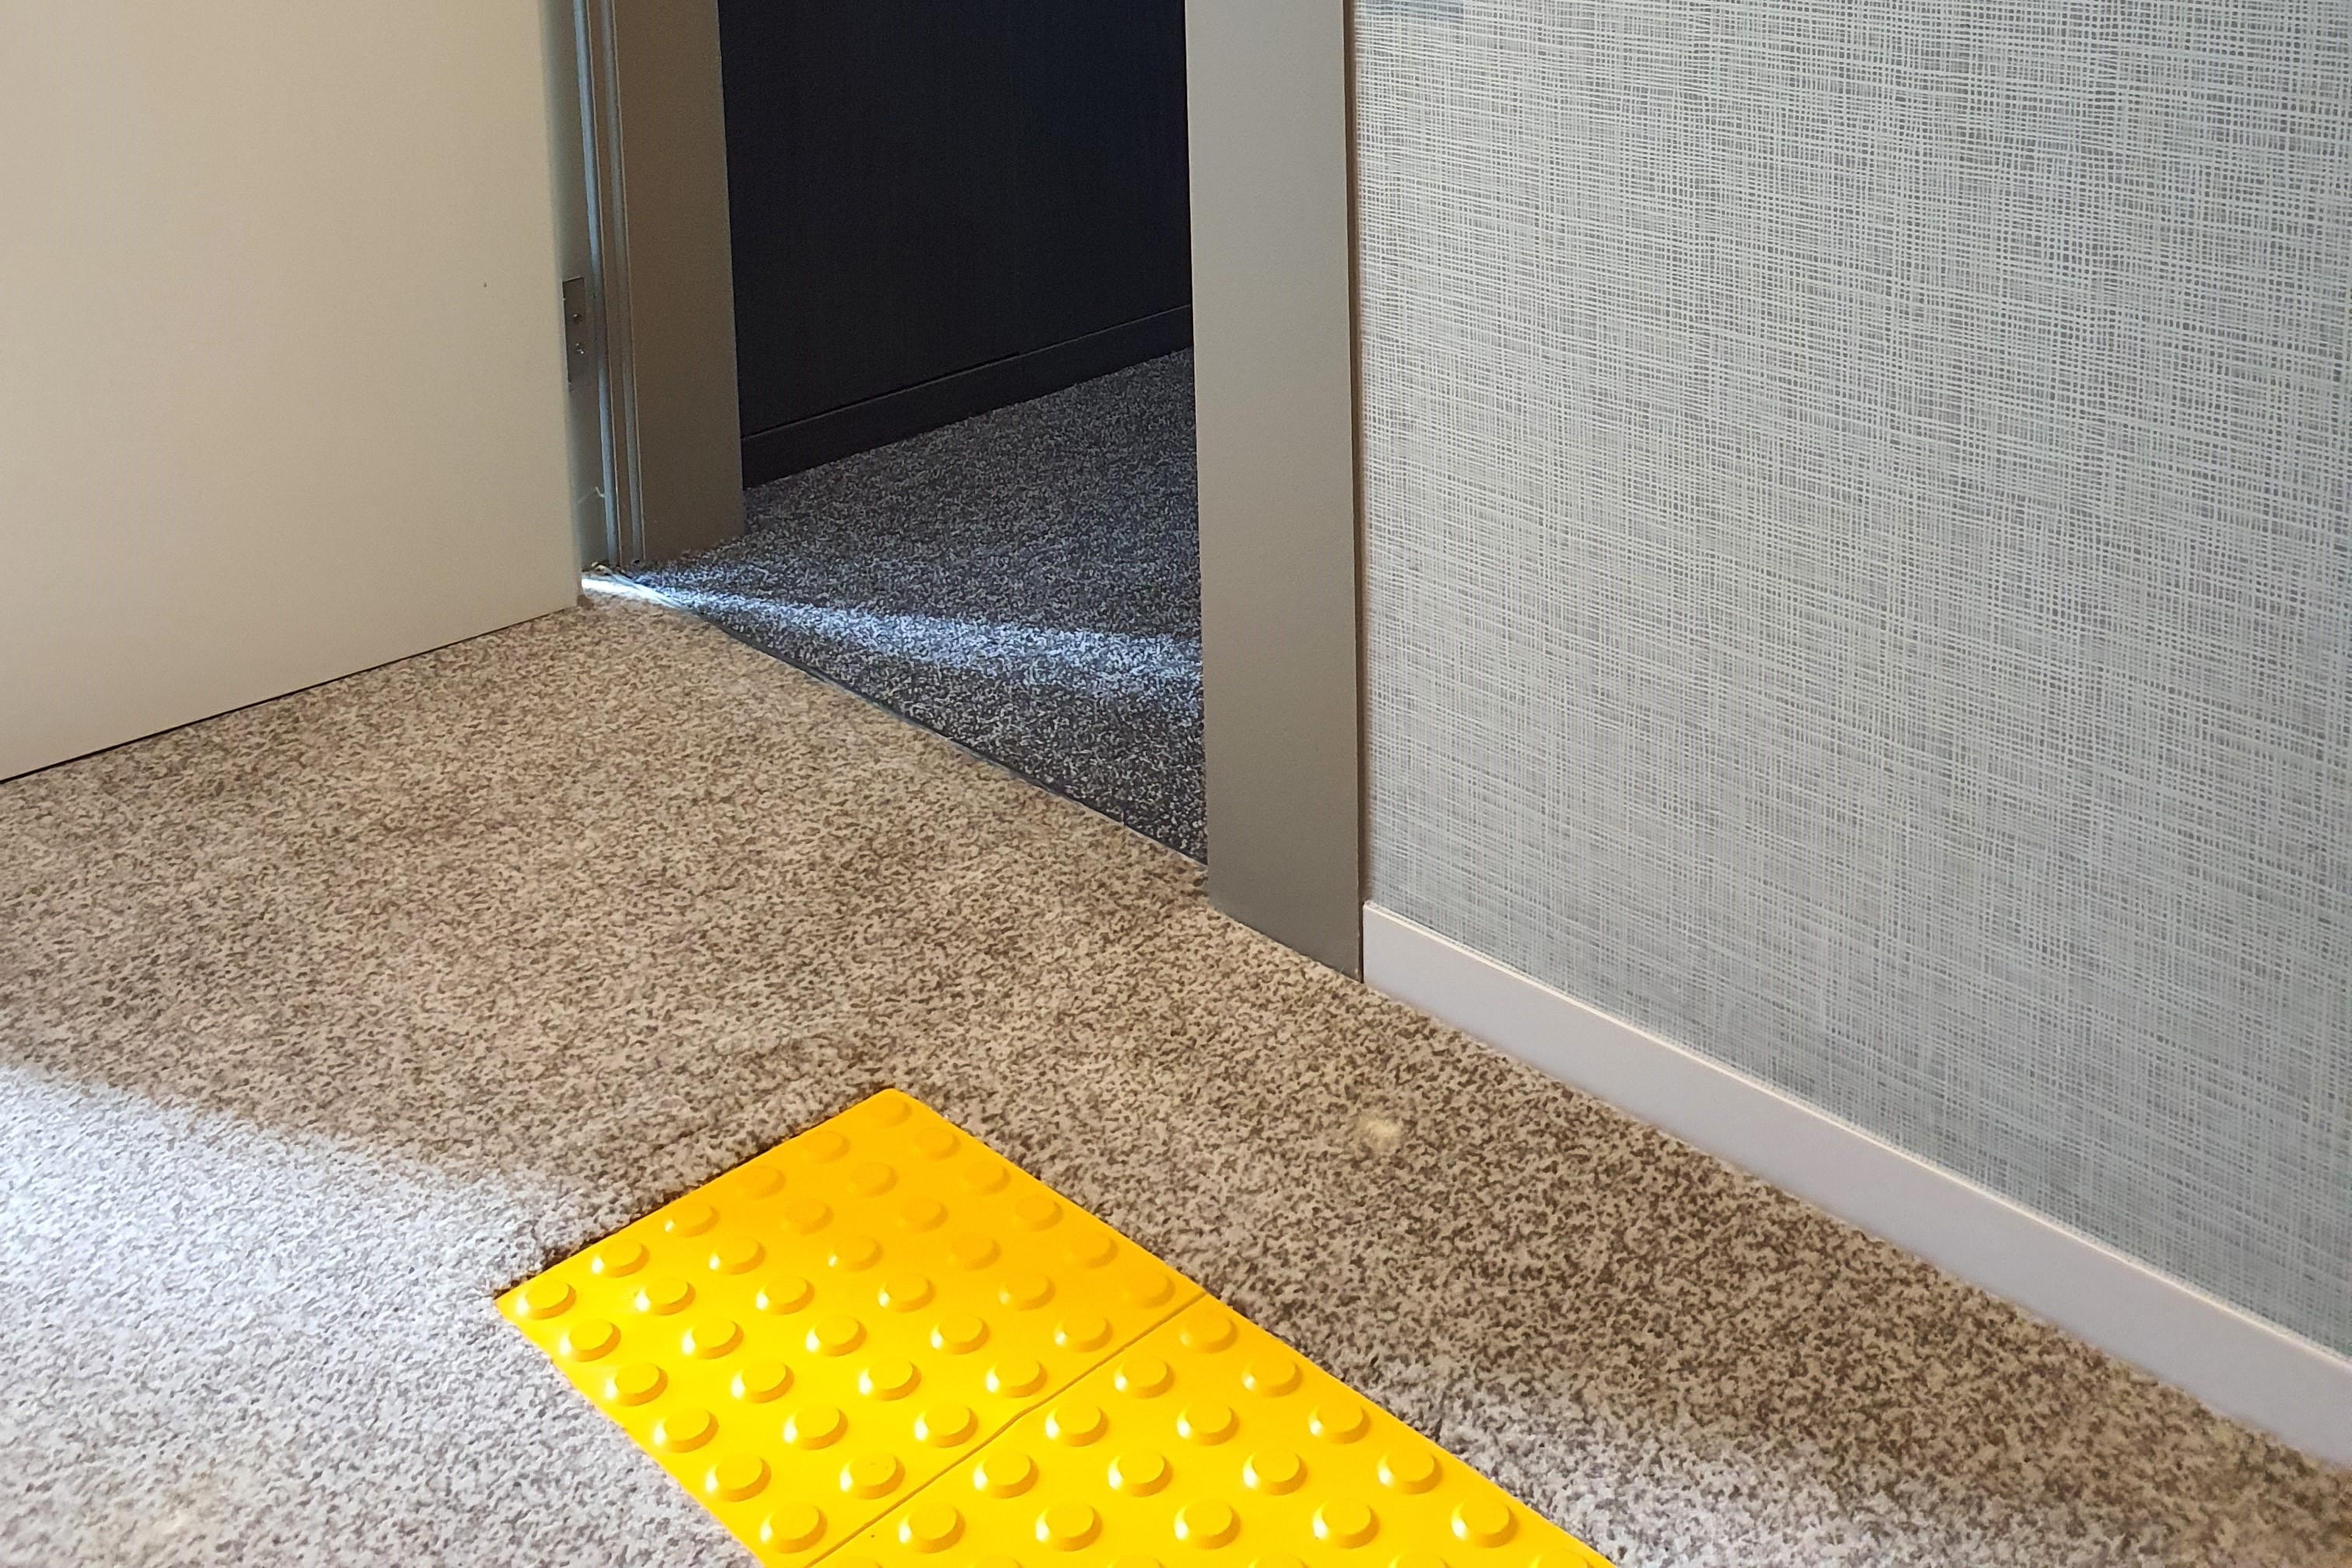 Entryway0 : The main entrance of the room with no steps and blind braille block installed